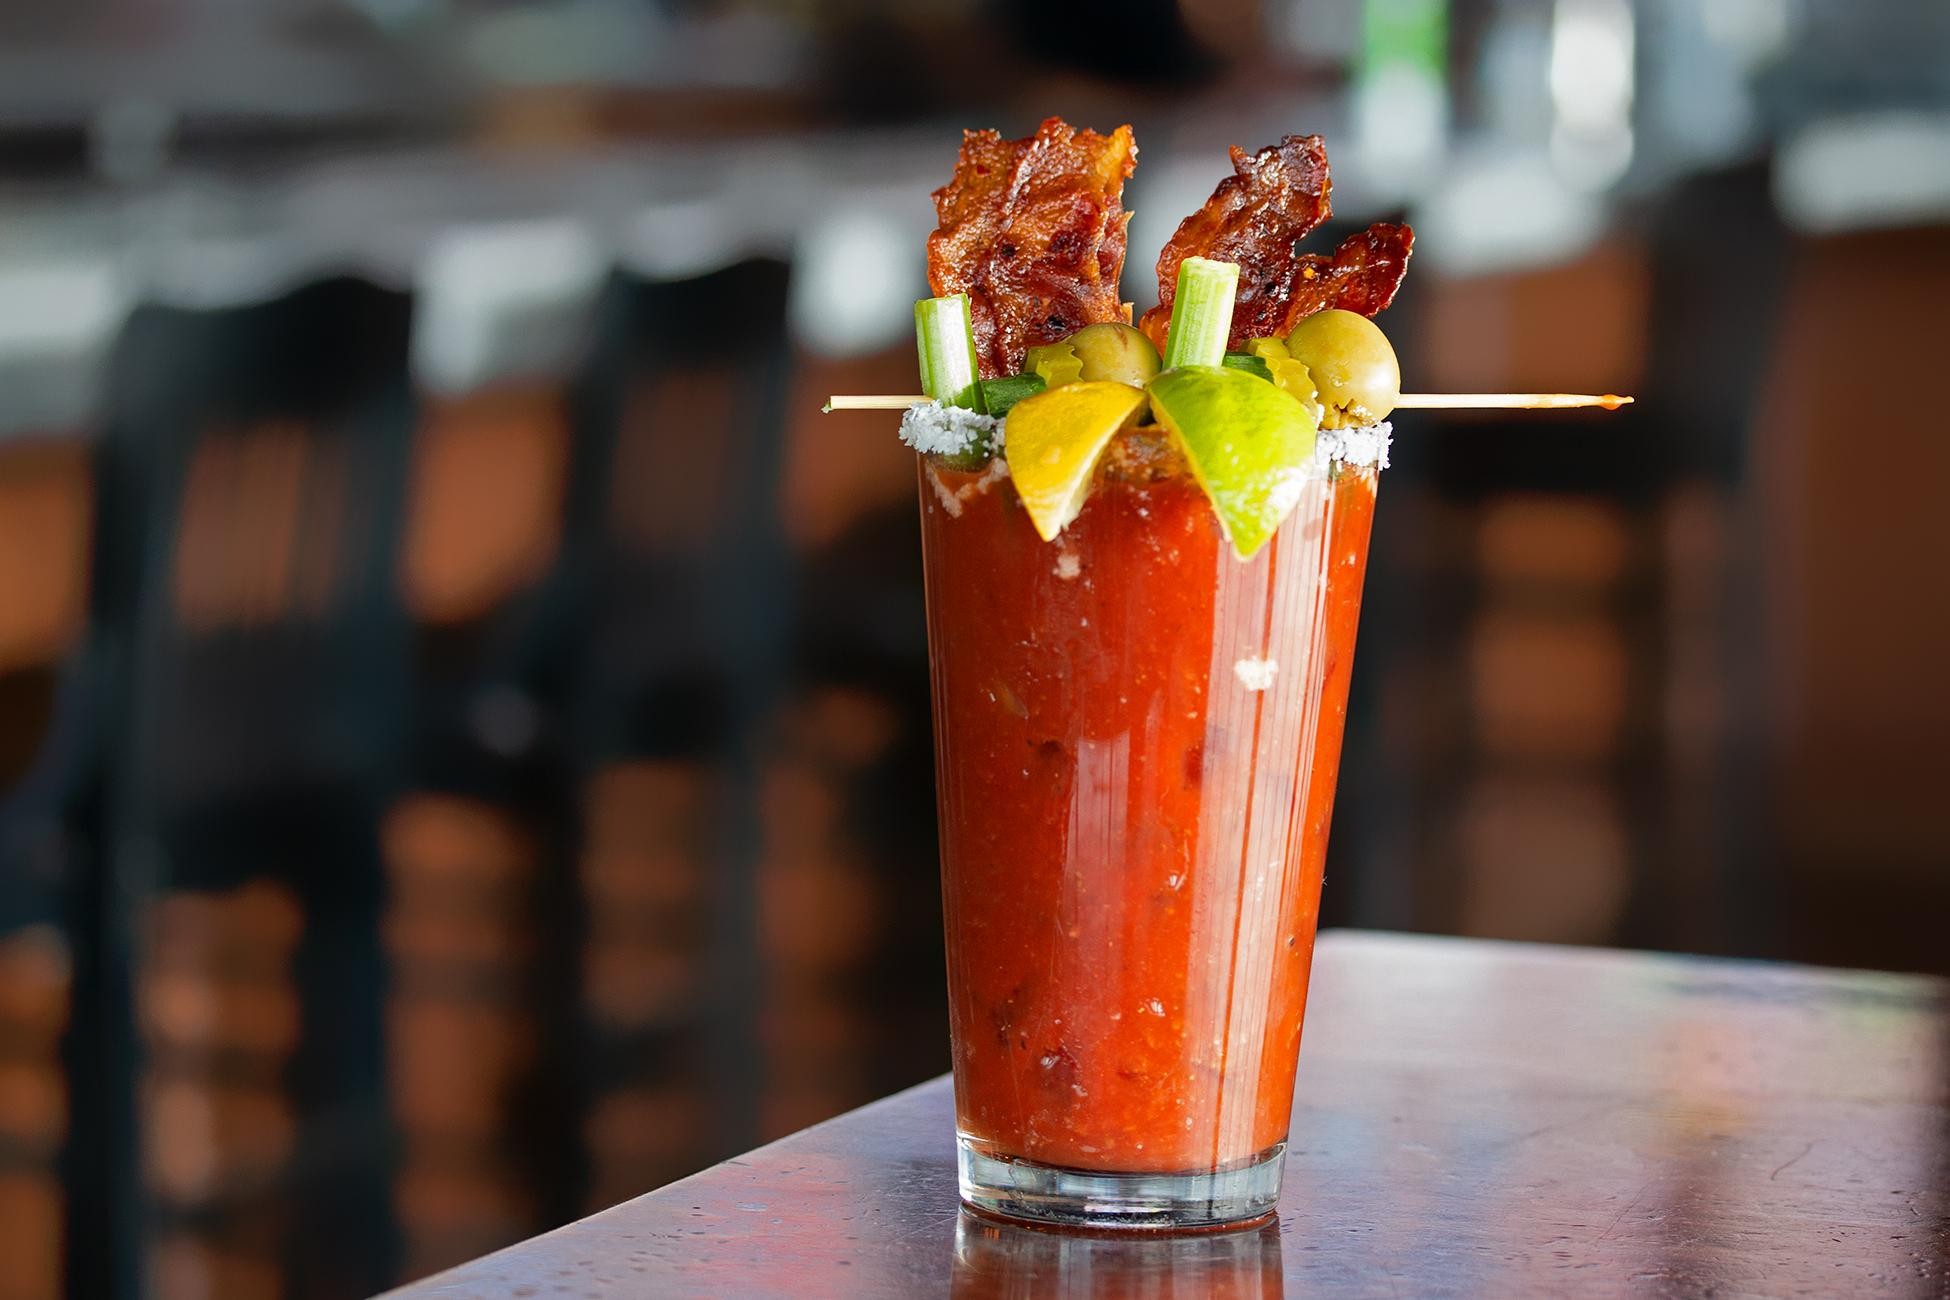 Bloody Mary "The Works"